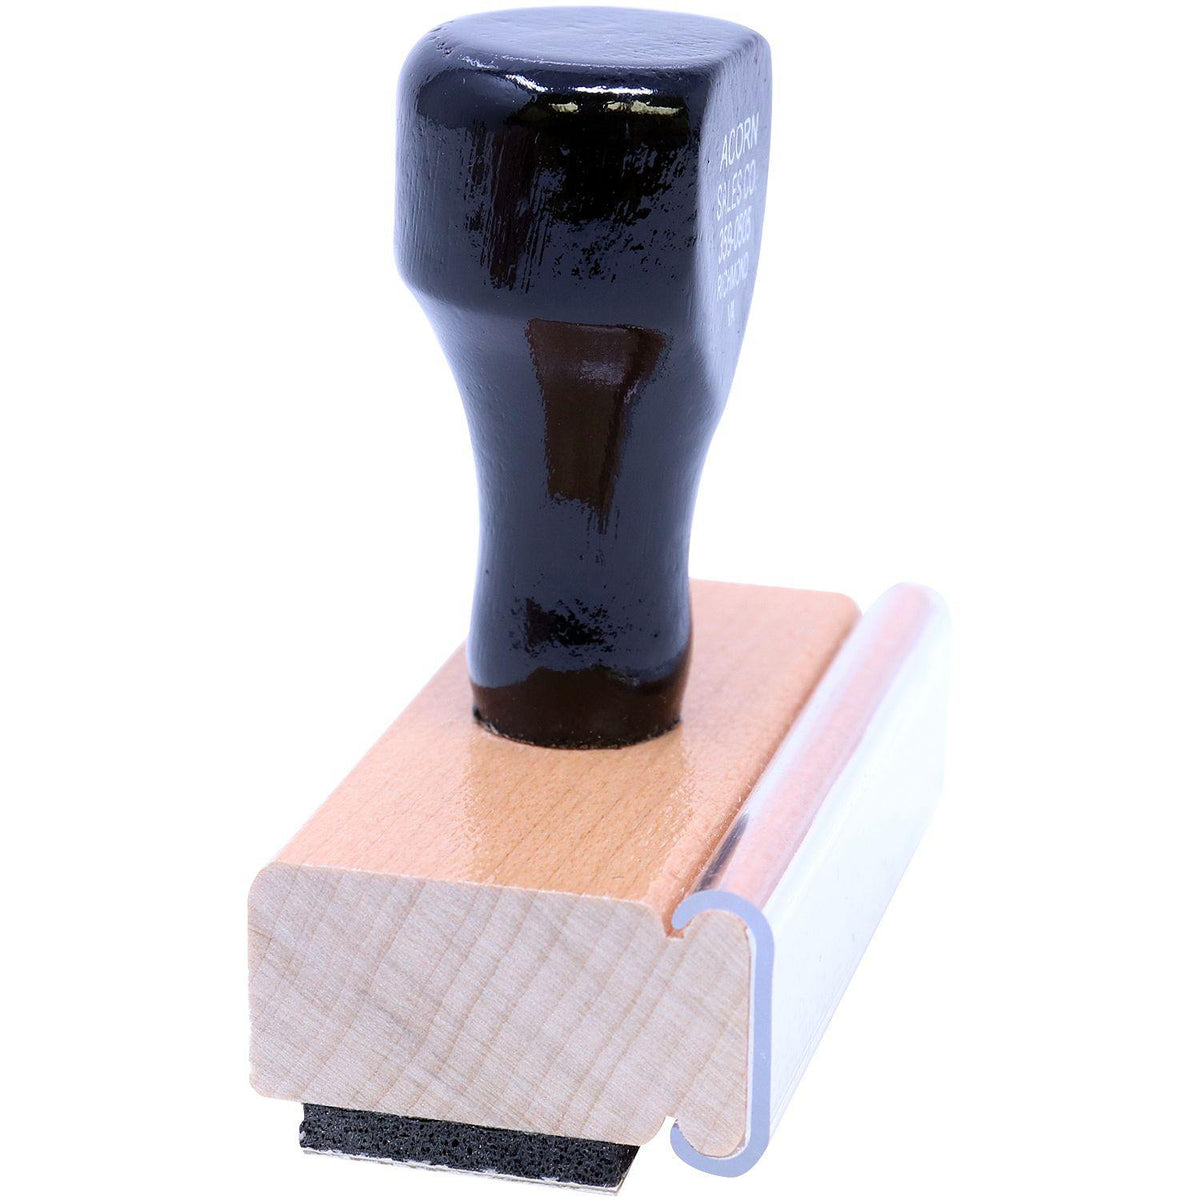 Side View of Insured Rubber Stamp at an Angle